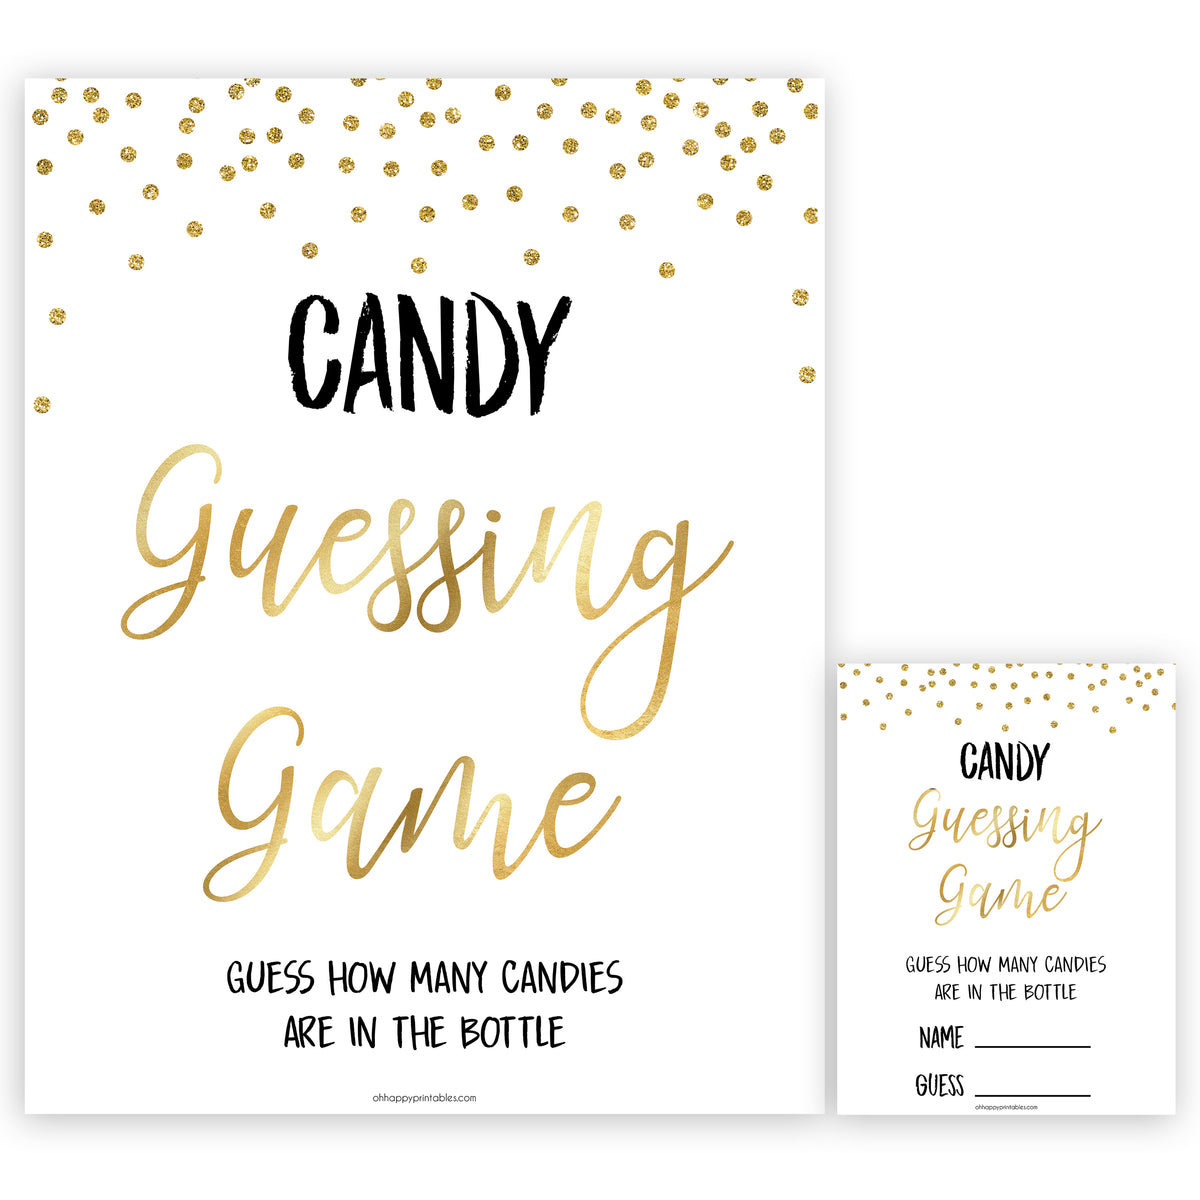 Template Free Printable Guess How Many Candies